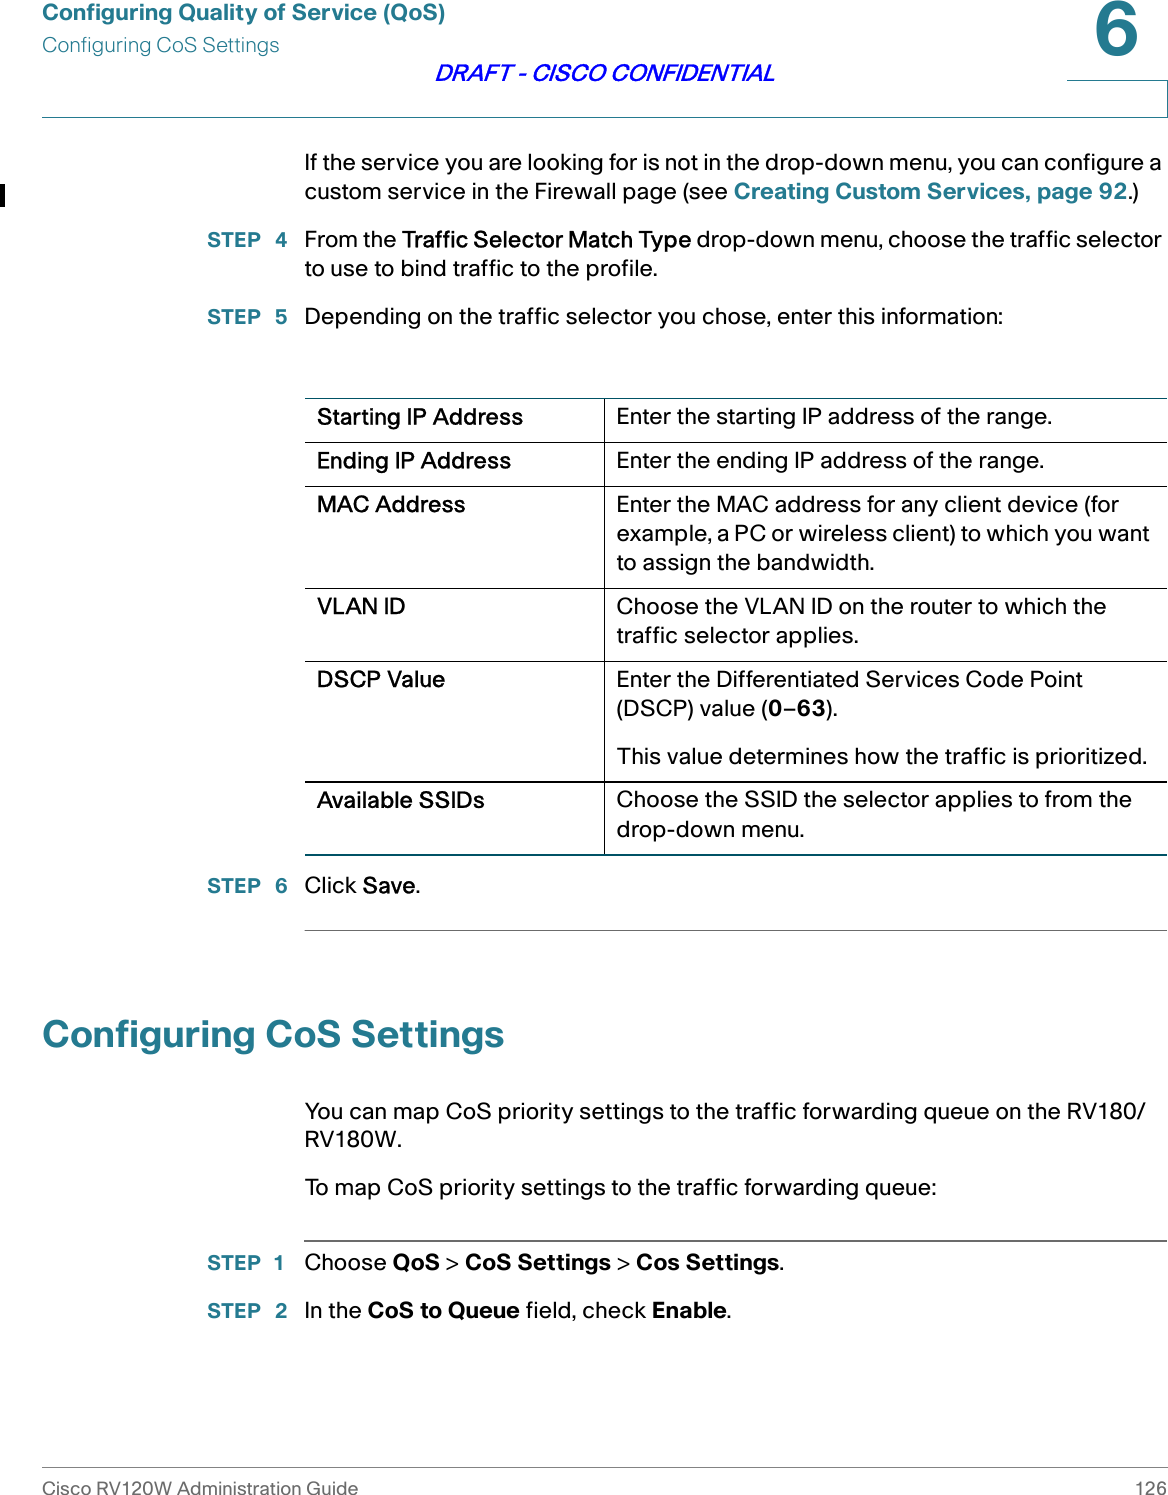 Configuring Quality of Service (QoS)Configuring CoS SettingsCisco RV120W Administration Guide 1266DRAFT - CISCO CONFIDENTIALIf the service you are looking for is not in the drop-down menu, you can configure a custom service in the Firewall page (see Creating Custom Services, page 92.)STEP  4 From the Traffic Selector Match Type drop-down menu, choose the traffic selector to use to bind traffic to the profile.STEP  5 Depending on the traffic selector you chose, enter this information:STEP  6 Click Save.Configuring CoS SettingsYou can map CoS priority settings to the traffic forwarding queue on the RV180/RV180W.To map CoS priority settings to the traffic forwarding queue:STEP 1 Choose QoS &gt; CoS Settings &gt; Cos Settings.STEP  2 In the CoS to Queue field, check Enable.Starting IP Address Enter the starting IP address of the range.Ending IP Address Enter the ending IP address of the range.MAC Address Enter the MAC address for any client device (for example, a PC or wireless client) to which you want to assign the bandwidth.VLAN ID Choose the VLAN ID on the router to which the traffic selector applies.DSCP Value Enter the Differentiated Services Code Point (DSCP) value (0–63). This value determines how the traffic is prioritized.Available SSIDs Choose the SSID the selector applies to from the drop-down menu.